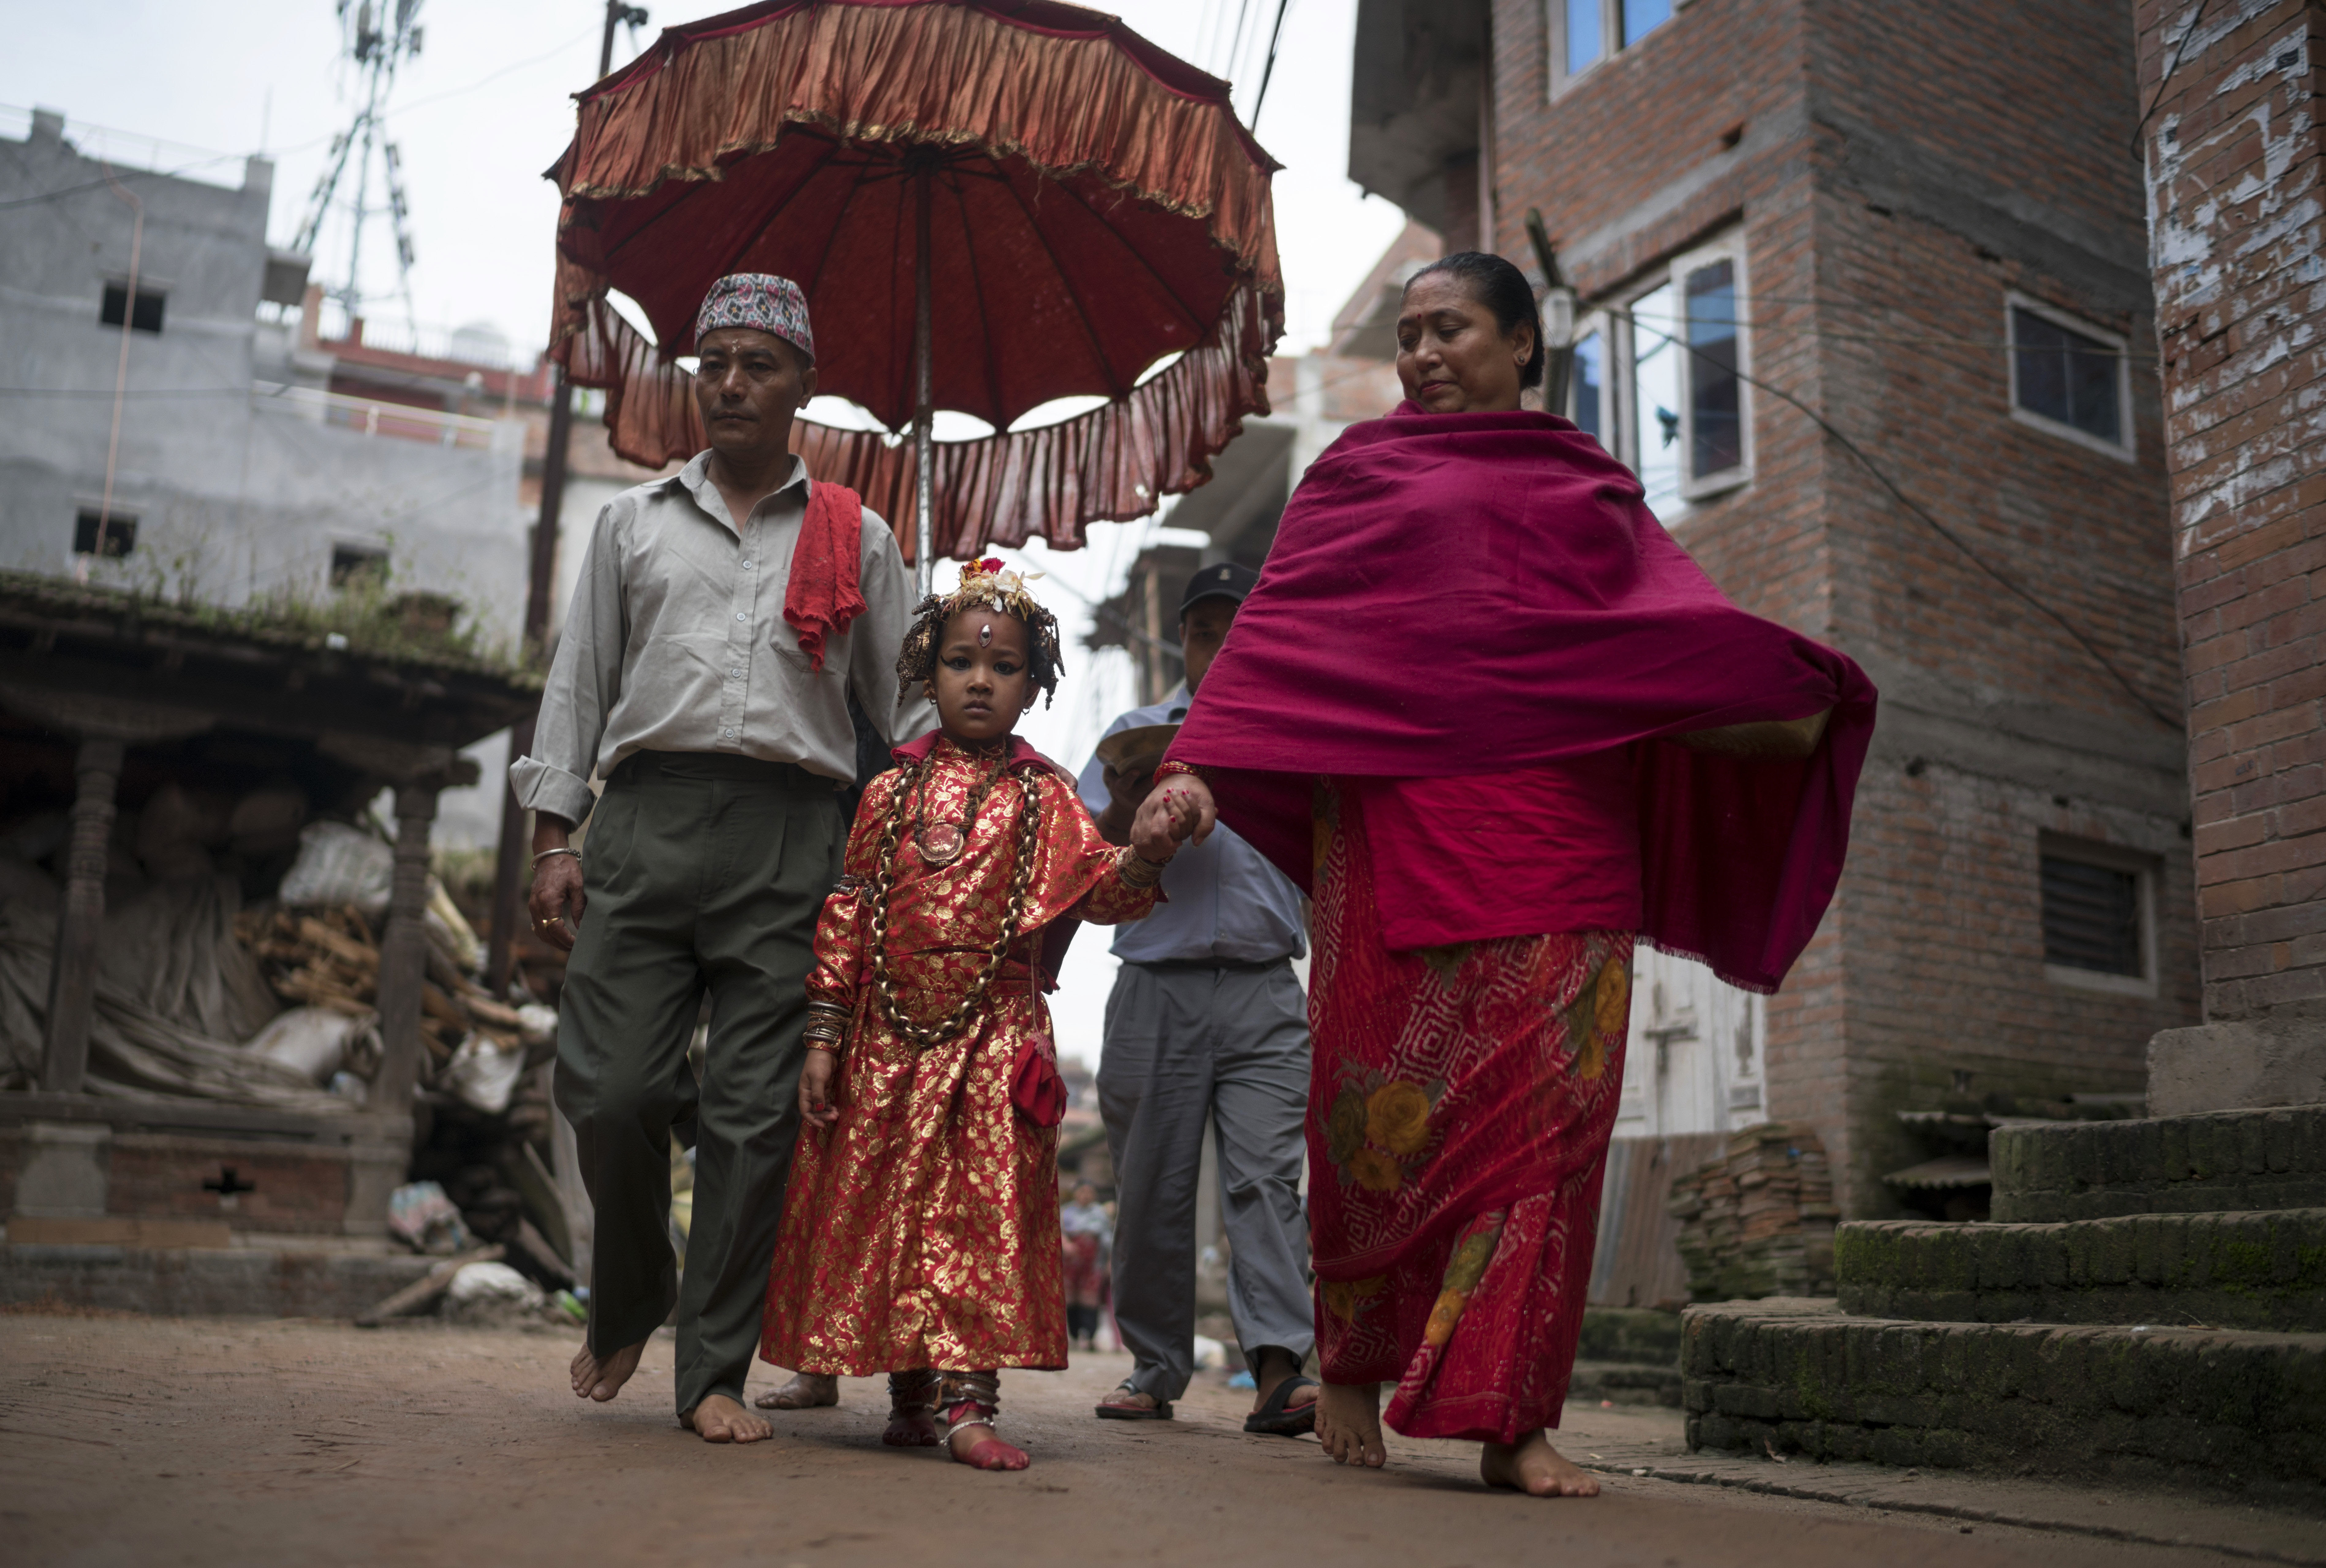 he Kumari priest and his wife escort Jibika Bajracharya, the newly appointed child goddess Kumari, through the streets on October 7, 2016 in Bhaktapur, Nepal. The Bhaktapur Kumari is a living child goddess and is an ancient tradition in Kathmandu Valley as devotees worship the newly appointed child goddess in order to receive blessings from ancestors or deities. As the new Kumari of Bhaktapur, Jibika Bajracharya performs her role in public during the 15-day long Dashain festival while spending the rest of the year as a goddess living a normal life with her parents at home until she is replaced at 11 years old. (Photo by Tom Van Cakenberghe/Getty Images)